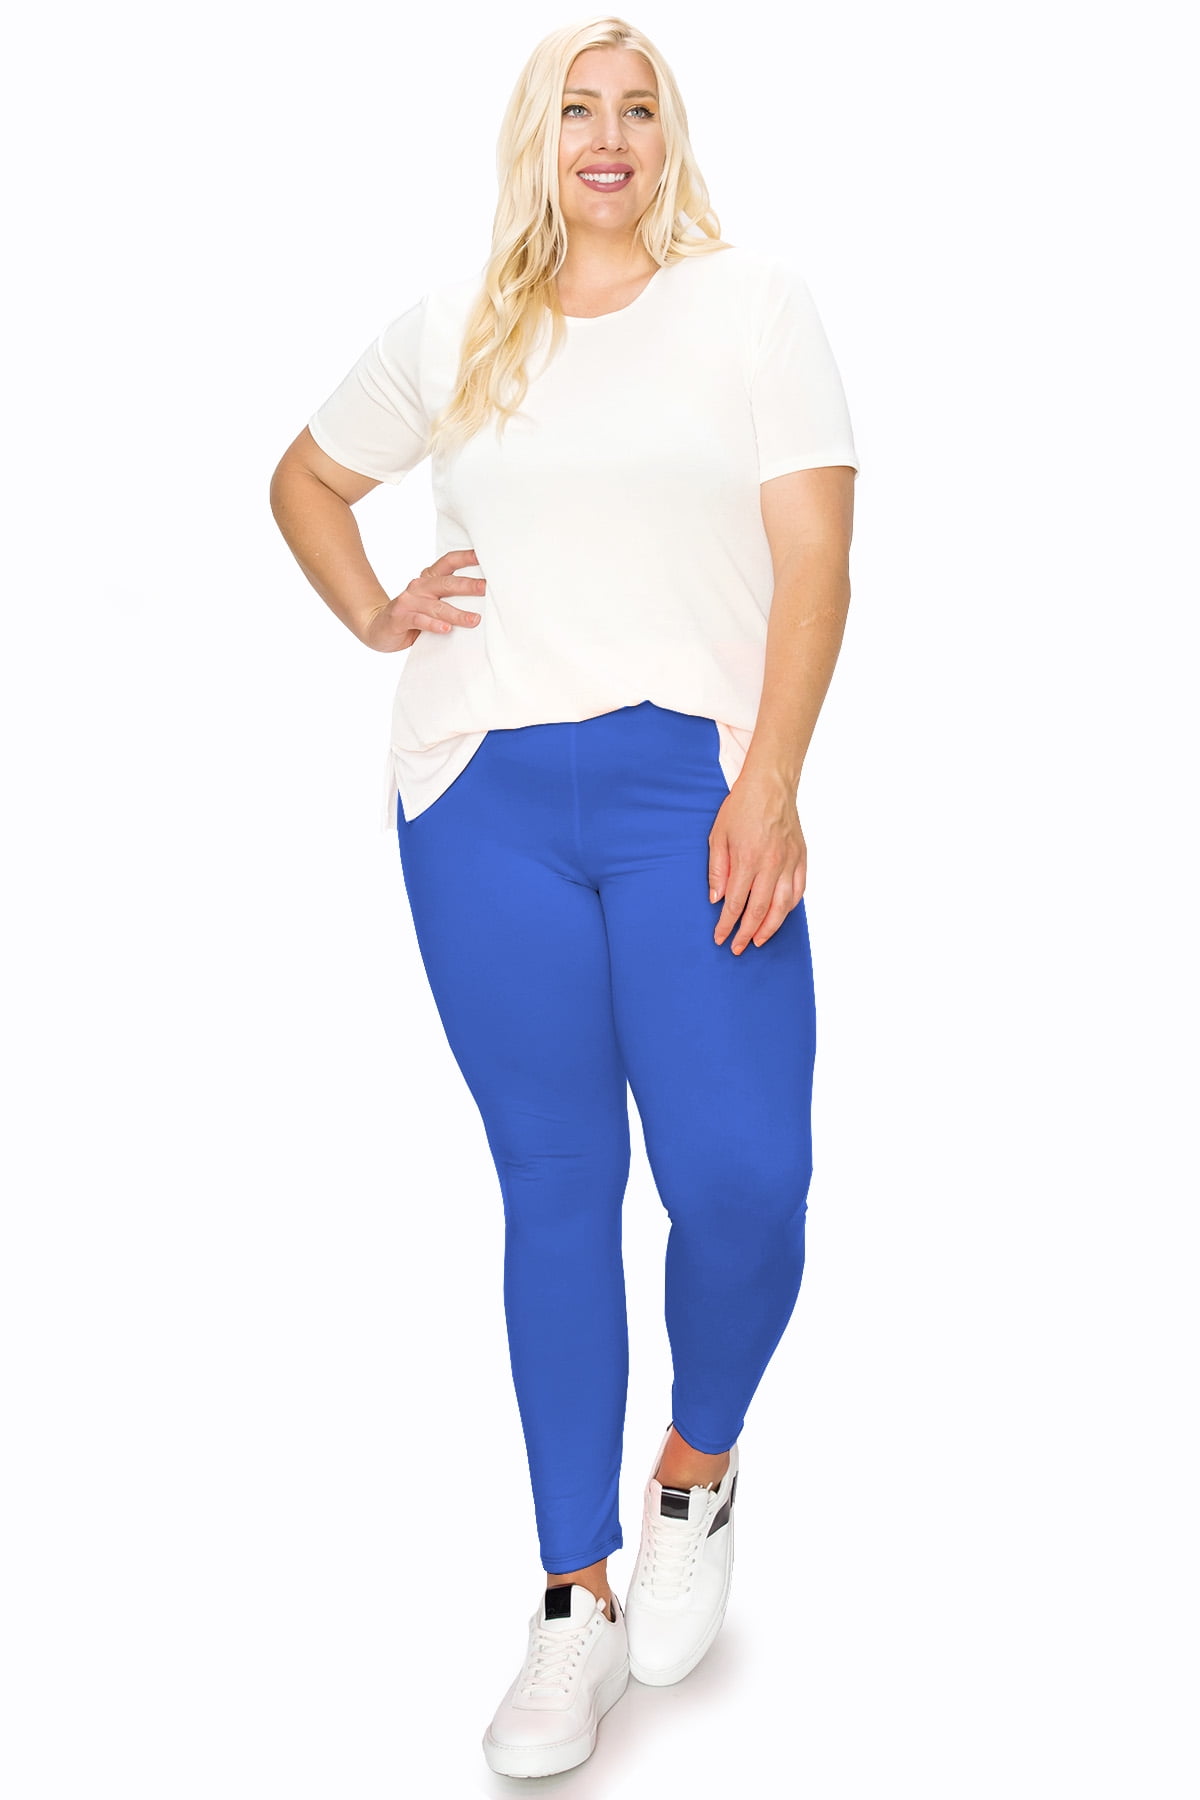 Moa Collection Women's Plus Size Solid High Waist Full Length